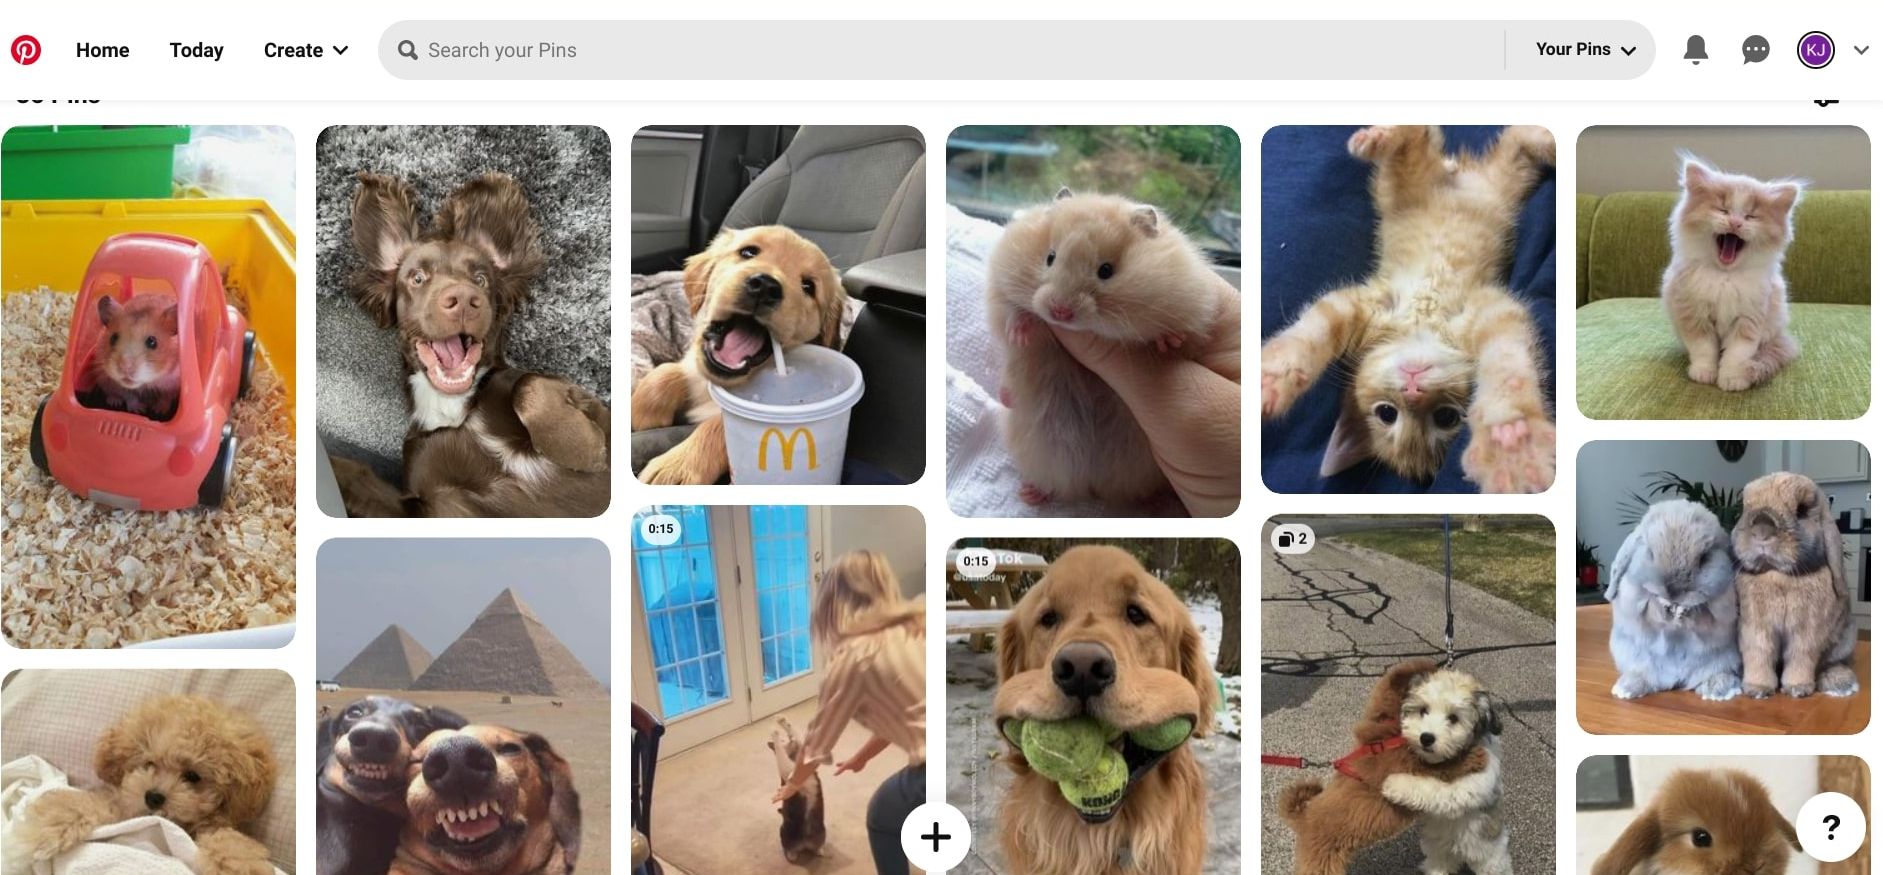 Screenshot of the animals board from Pinterest